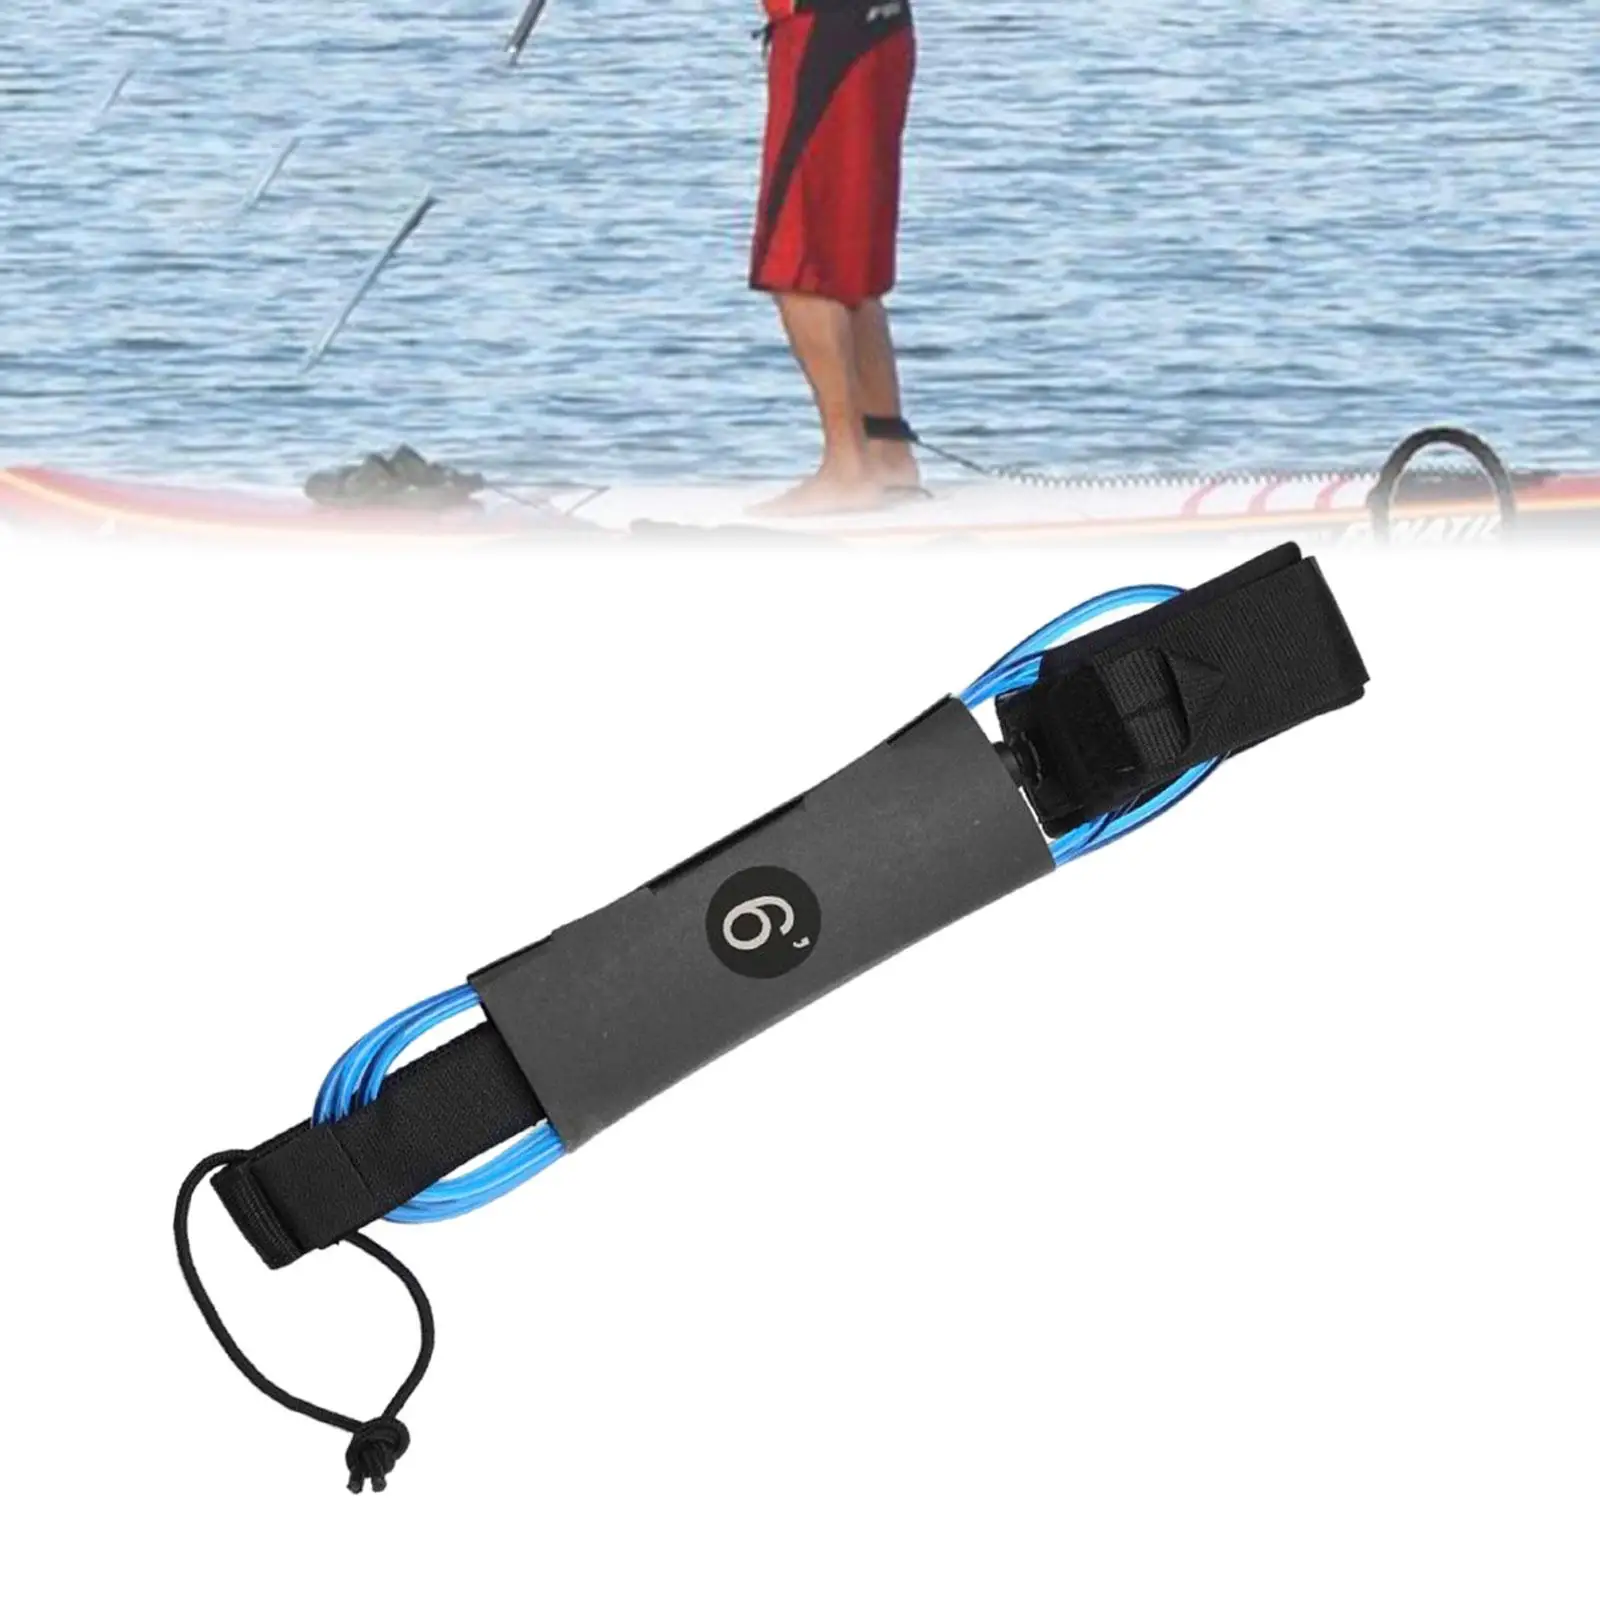 Surfing Leash Elastic Leg Foot Rope Adjustable Paddle Board Ankle Strap Cuff Cord for Shortboard Stand up Paddleboarding Outdoor